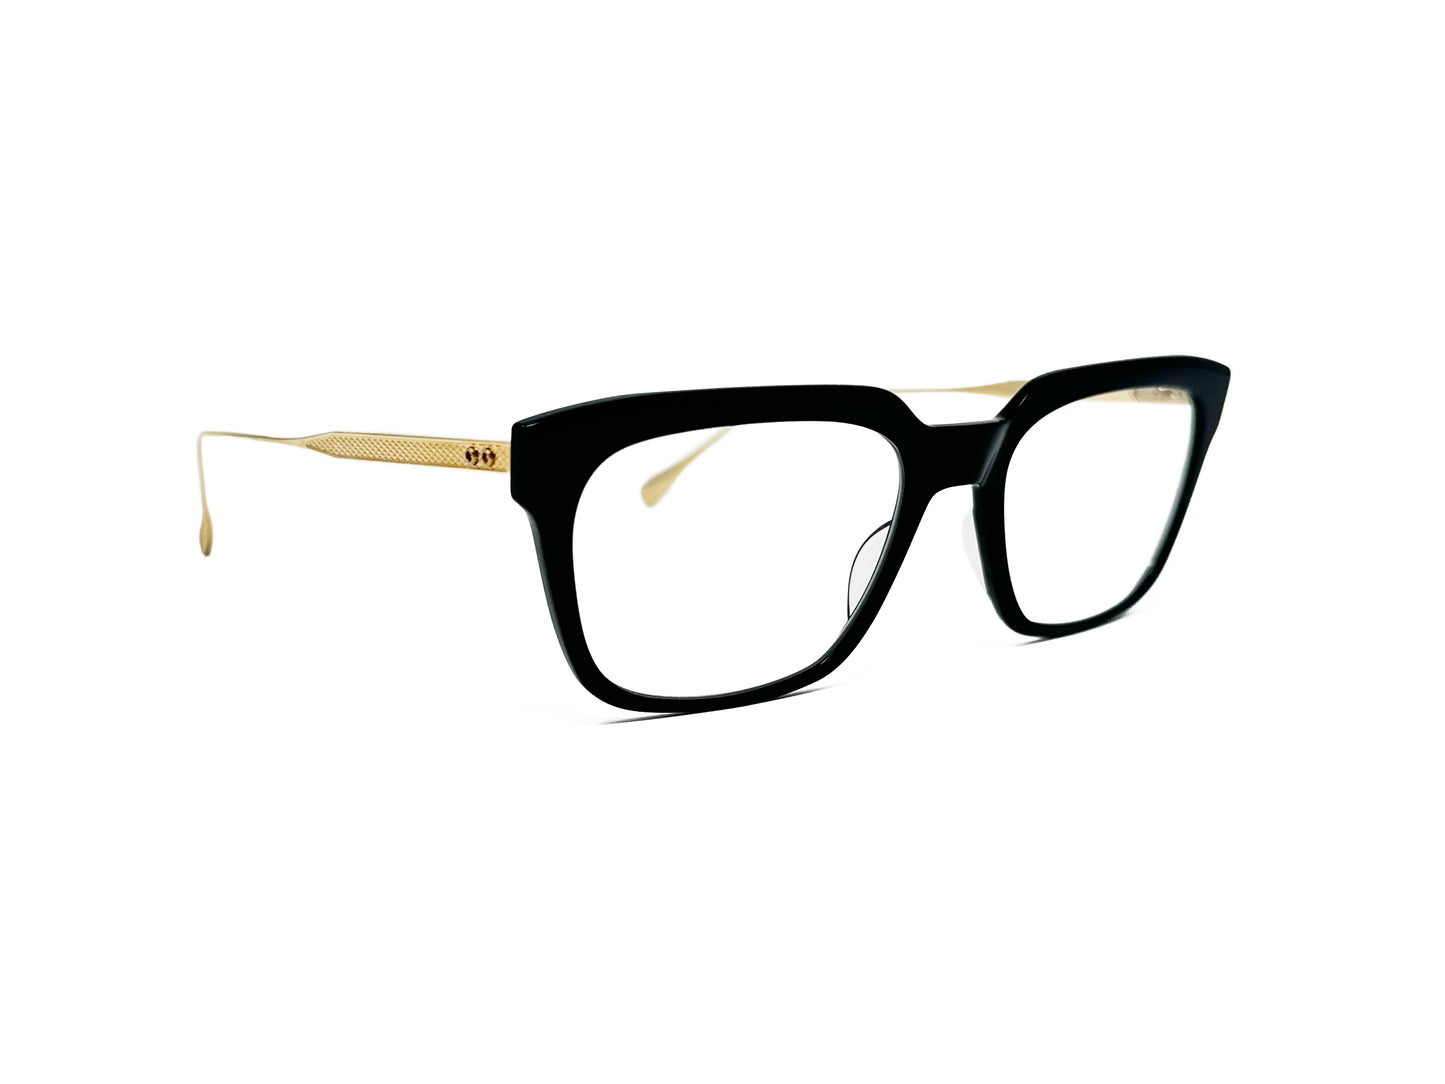 Dita upward-angled, rectangular, acetate optical frame with metal temples. Model: Argand. Color: Black frame with gold temples. Side view.